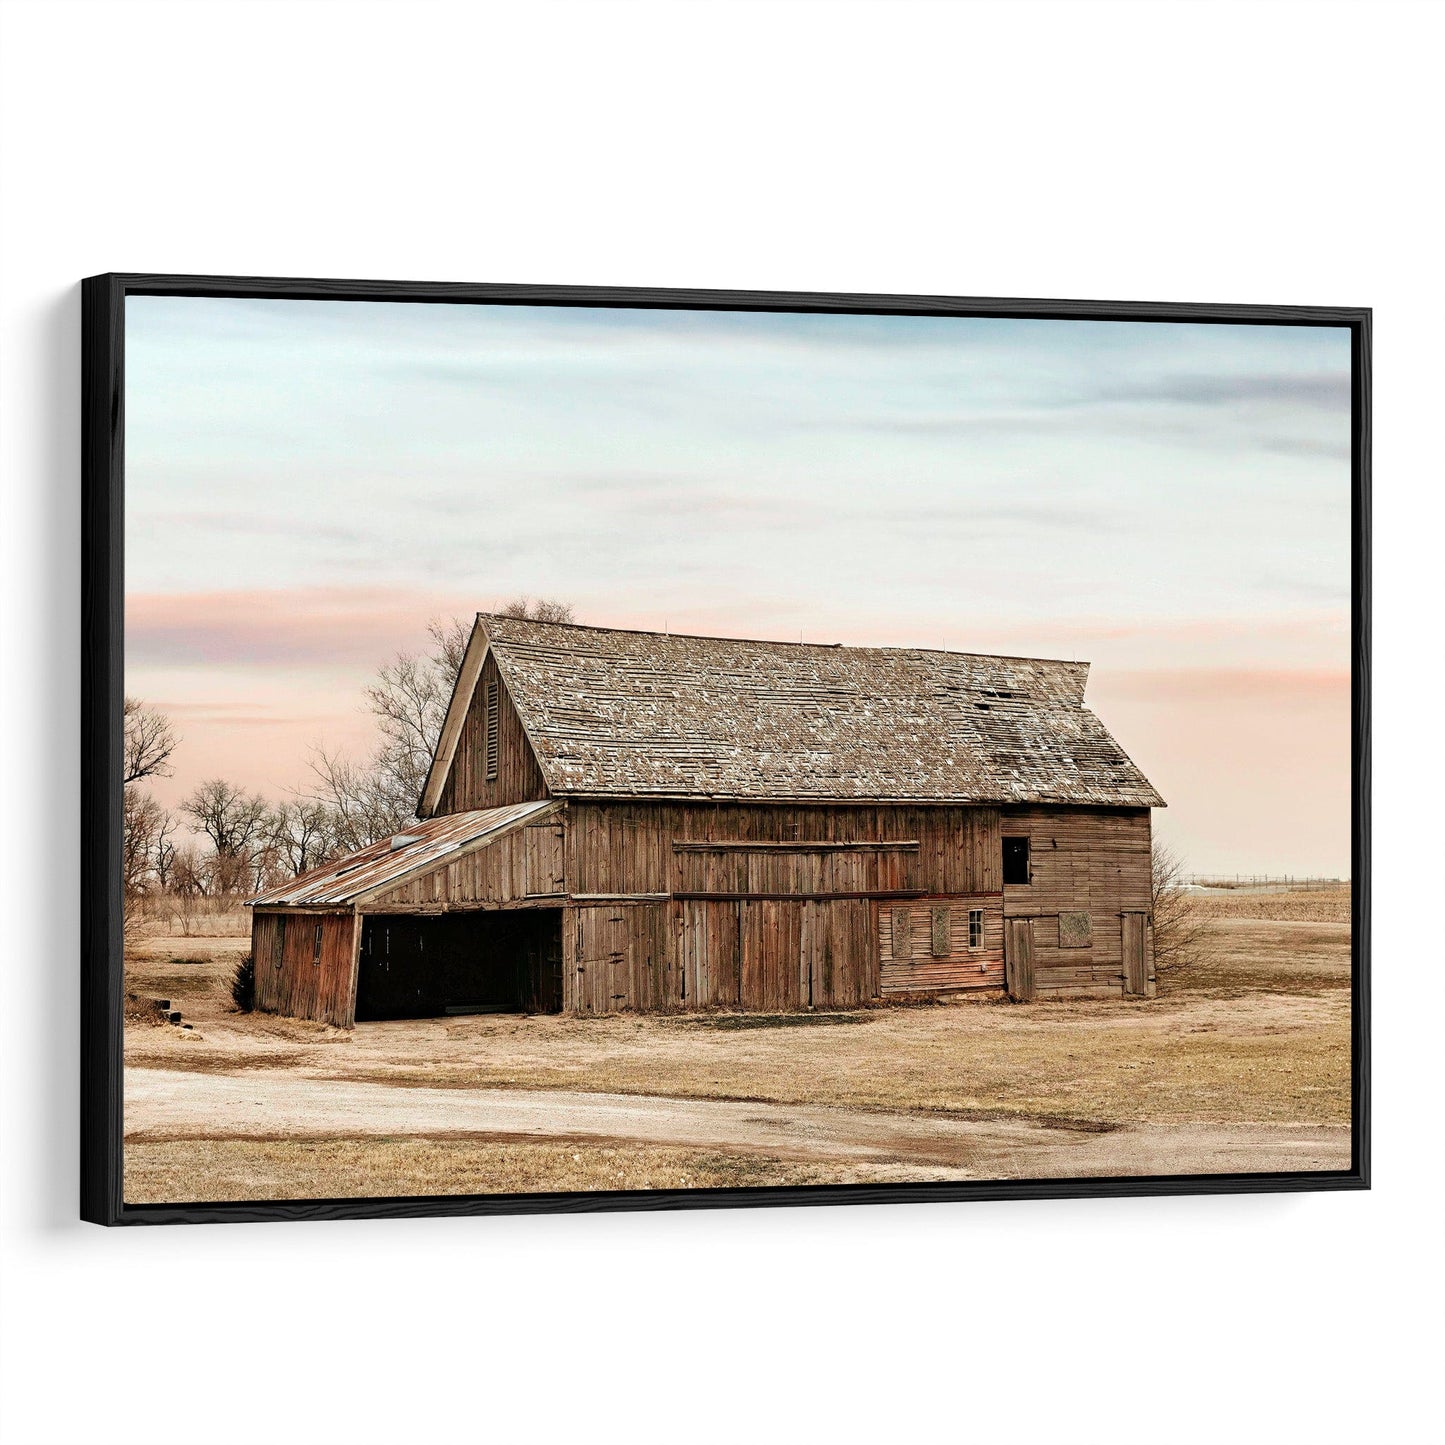 Old Barn Rustic Wall Art Canvas Canvas-Black Frame / 12 x 18 Inches Wall Art Teri James Photography